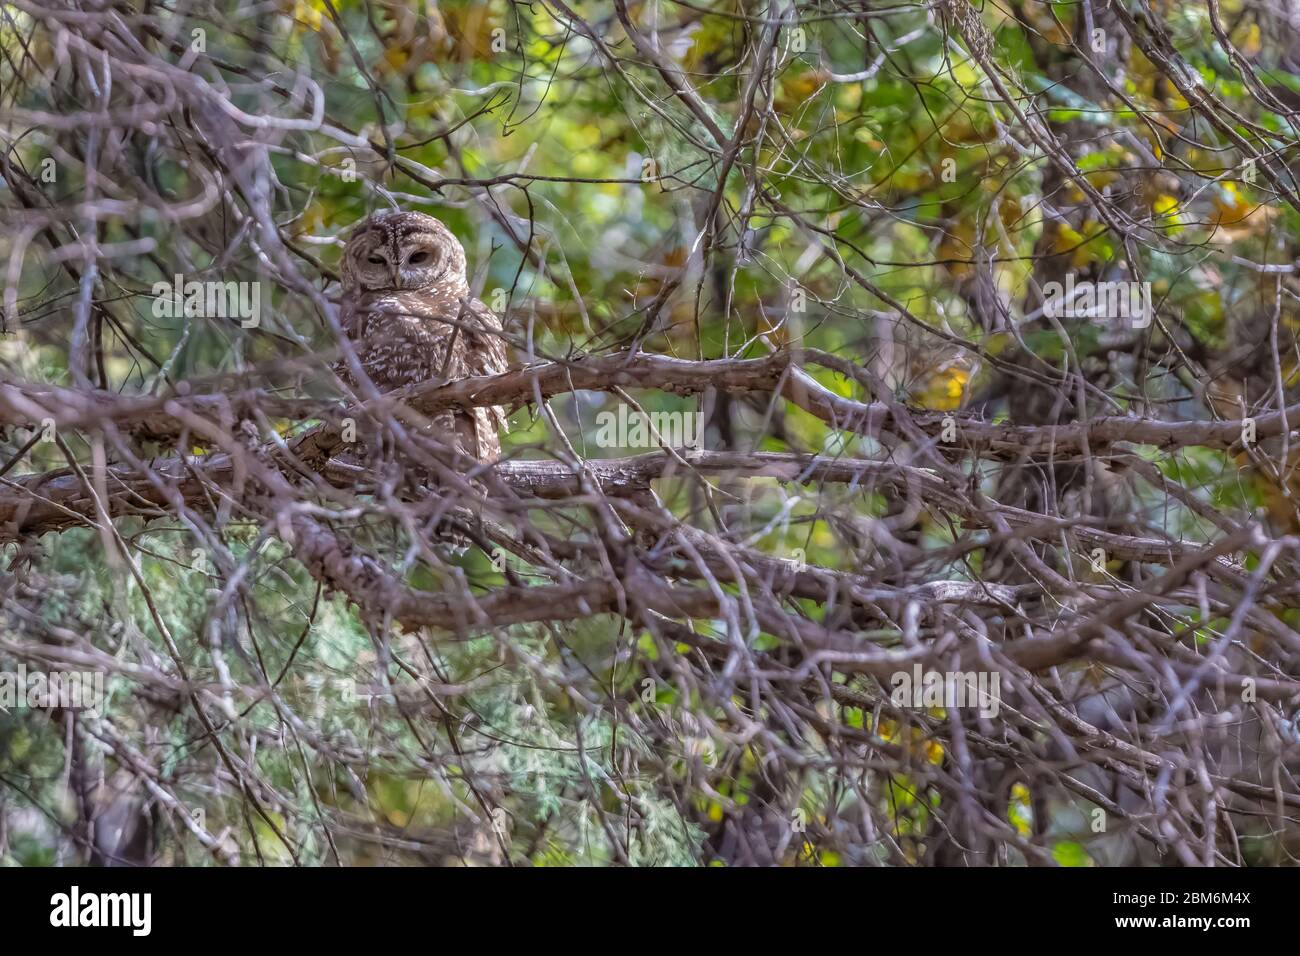 Mexican Spotted Owl, Strix occidentalis lucida, a threatened species, perched in a tree along the Cliff Dweller Trail in Gila Cliff Dwellings National Stock Photo